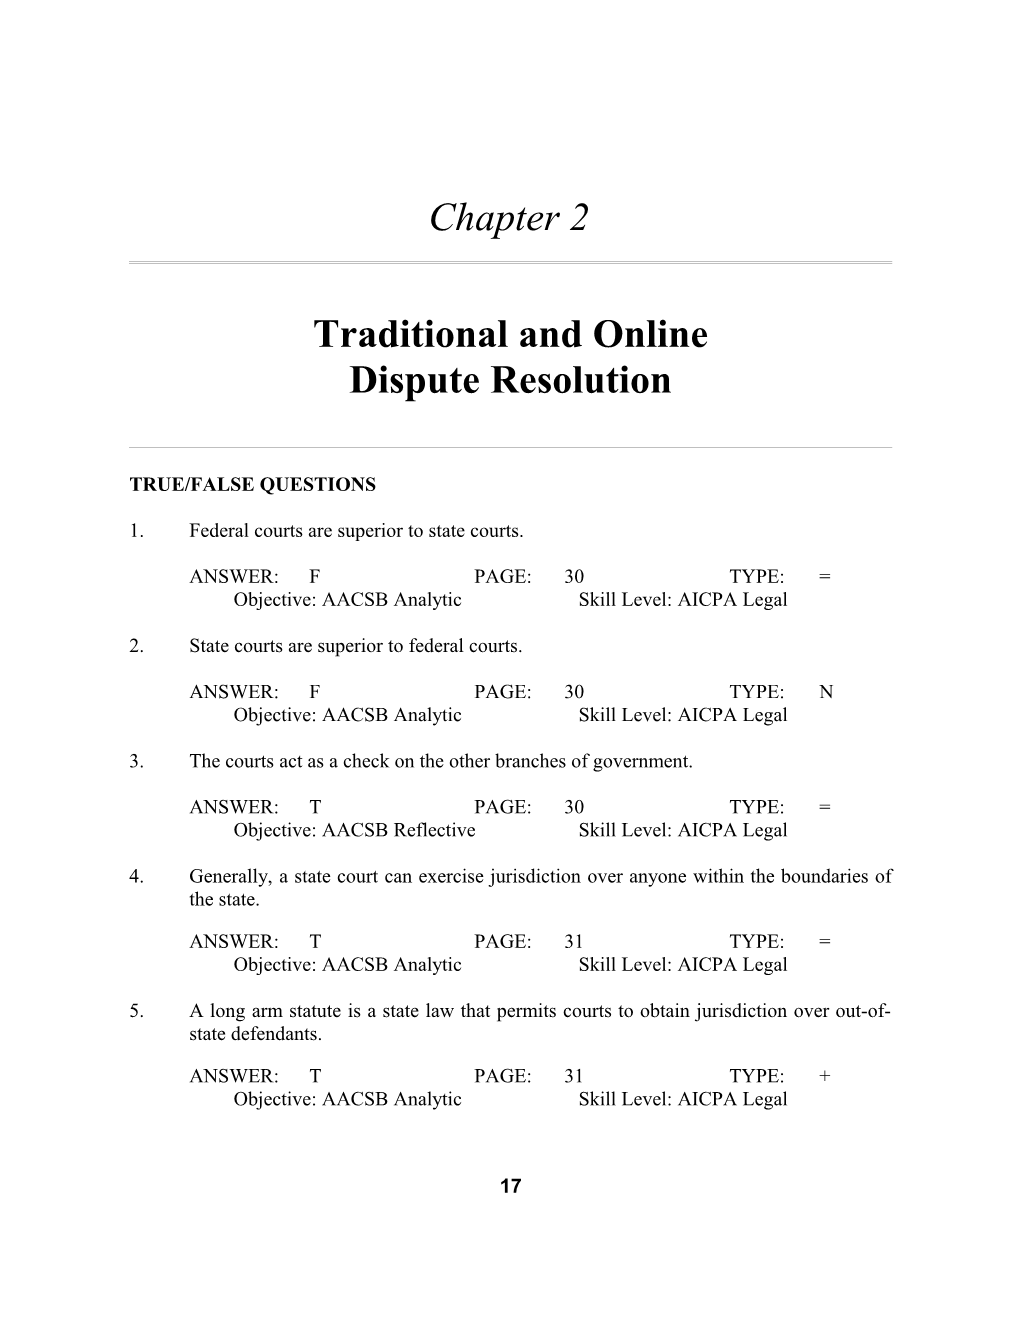 Chapter 2: Traditional and Online Dispute Resolution 1